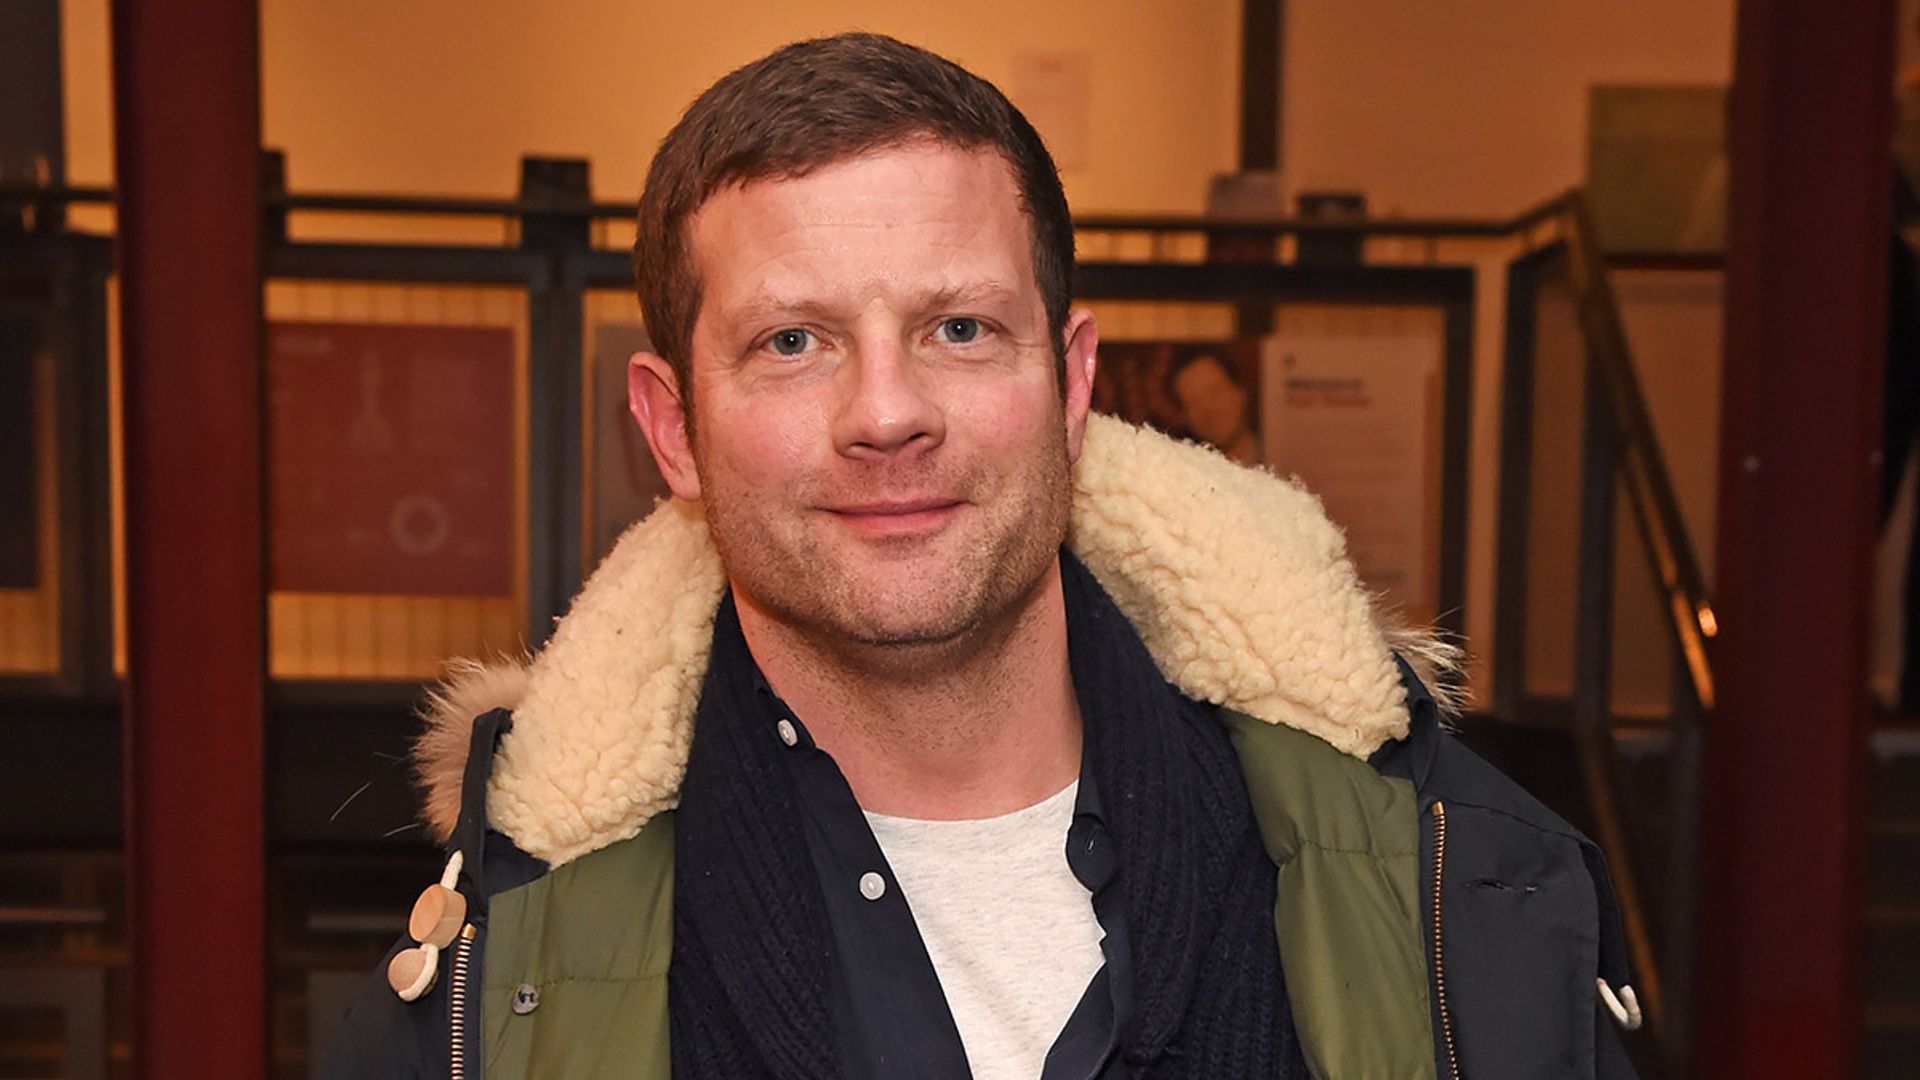 Dermot O'Leary shares very rare photos of his lookalike sister